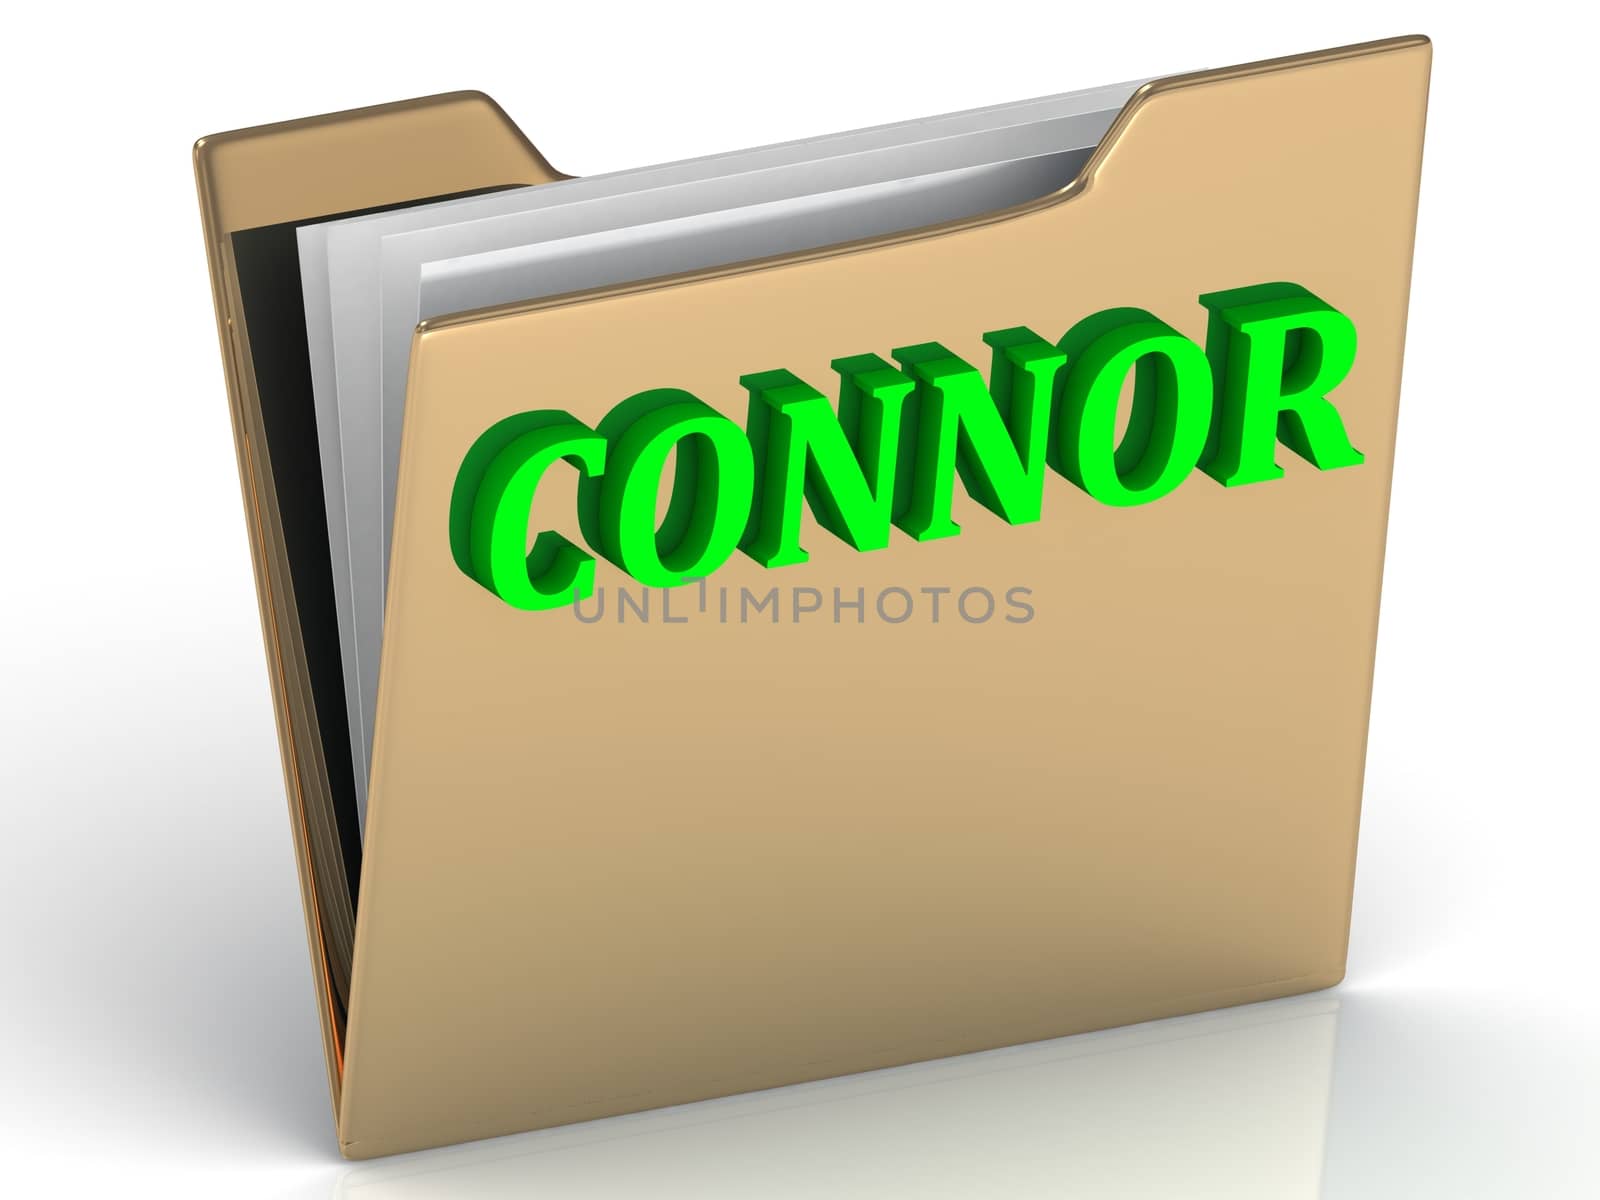 CONNOR- bright green letters on gold paperwork folder on a white background